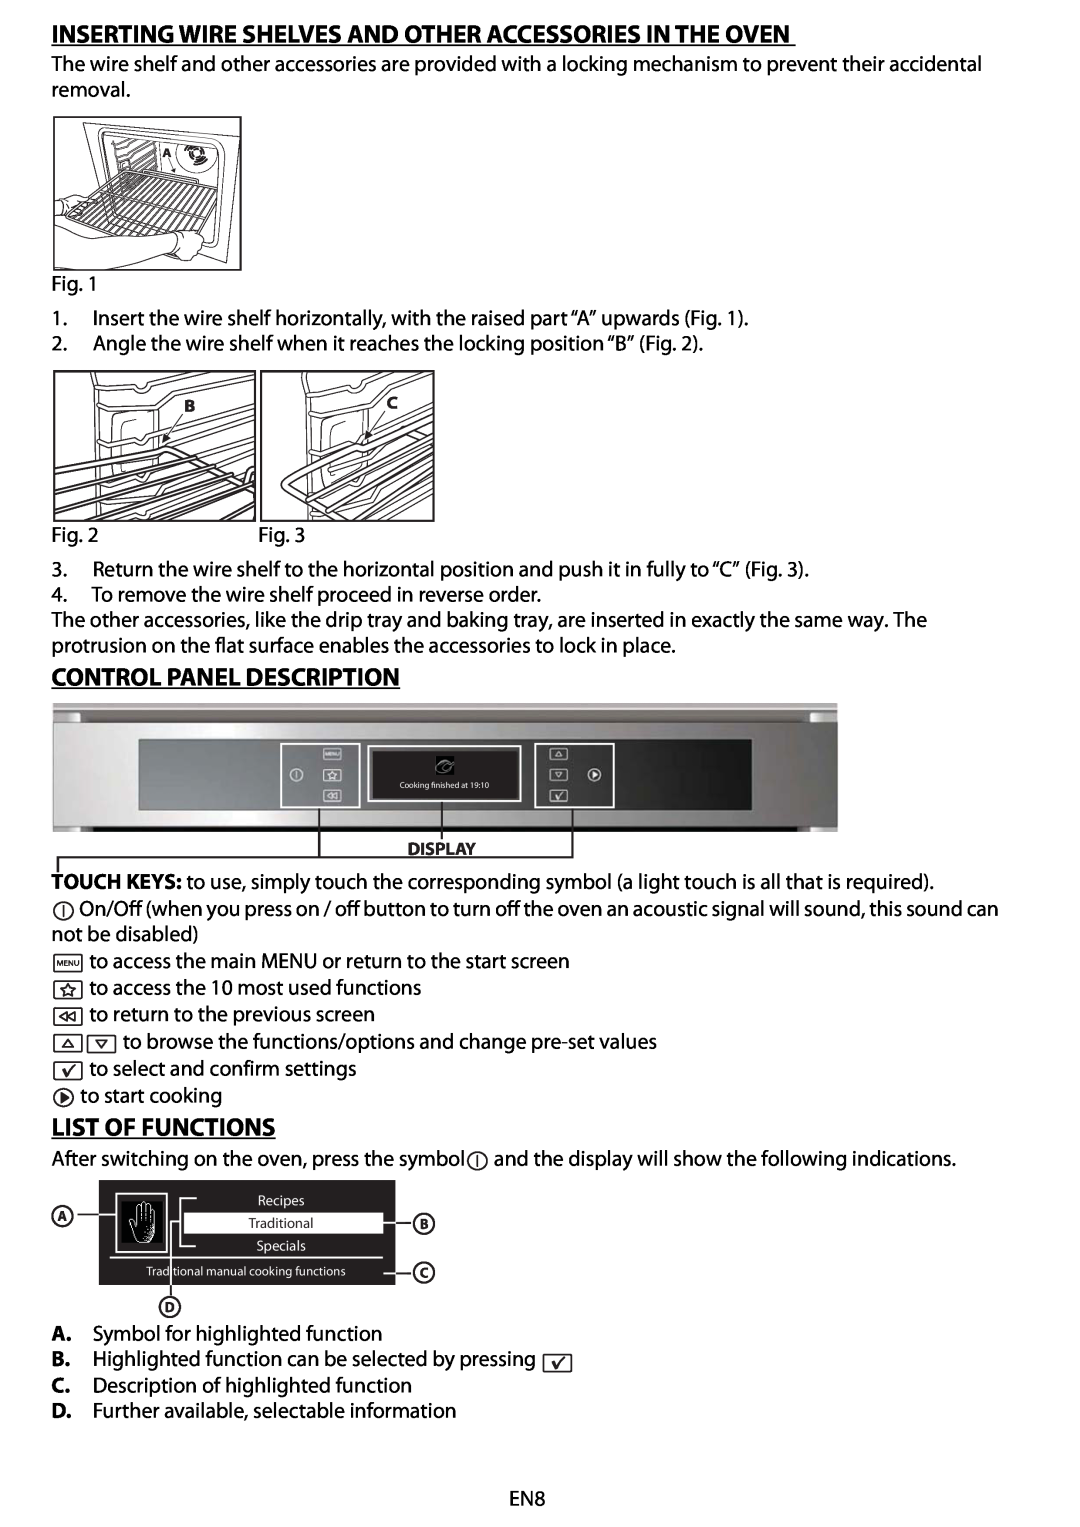 Whirlpool AKZM 663 Inserting Wire Shelves And Other Accessories In The Oven, Control Panel Description, List Of Functions 